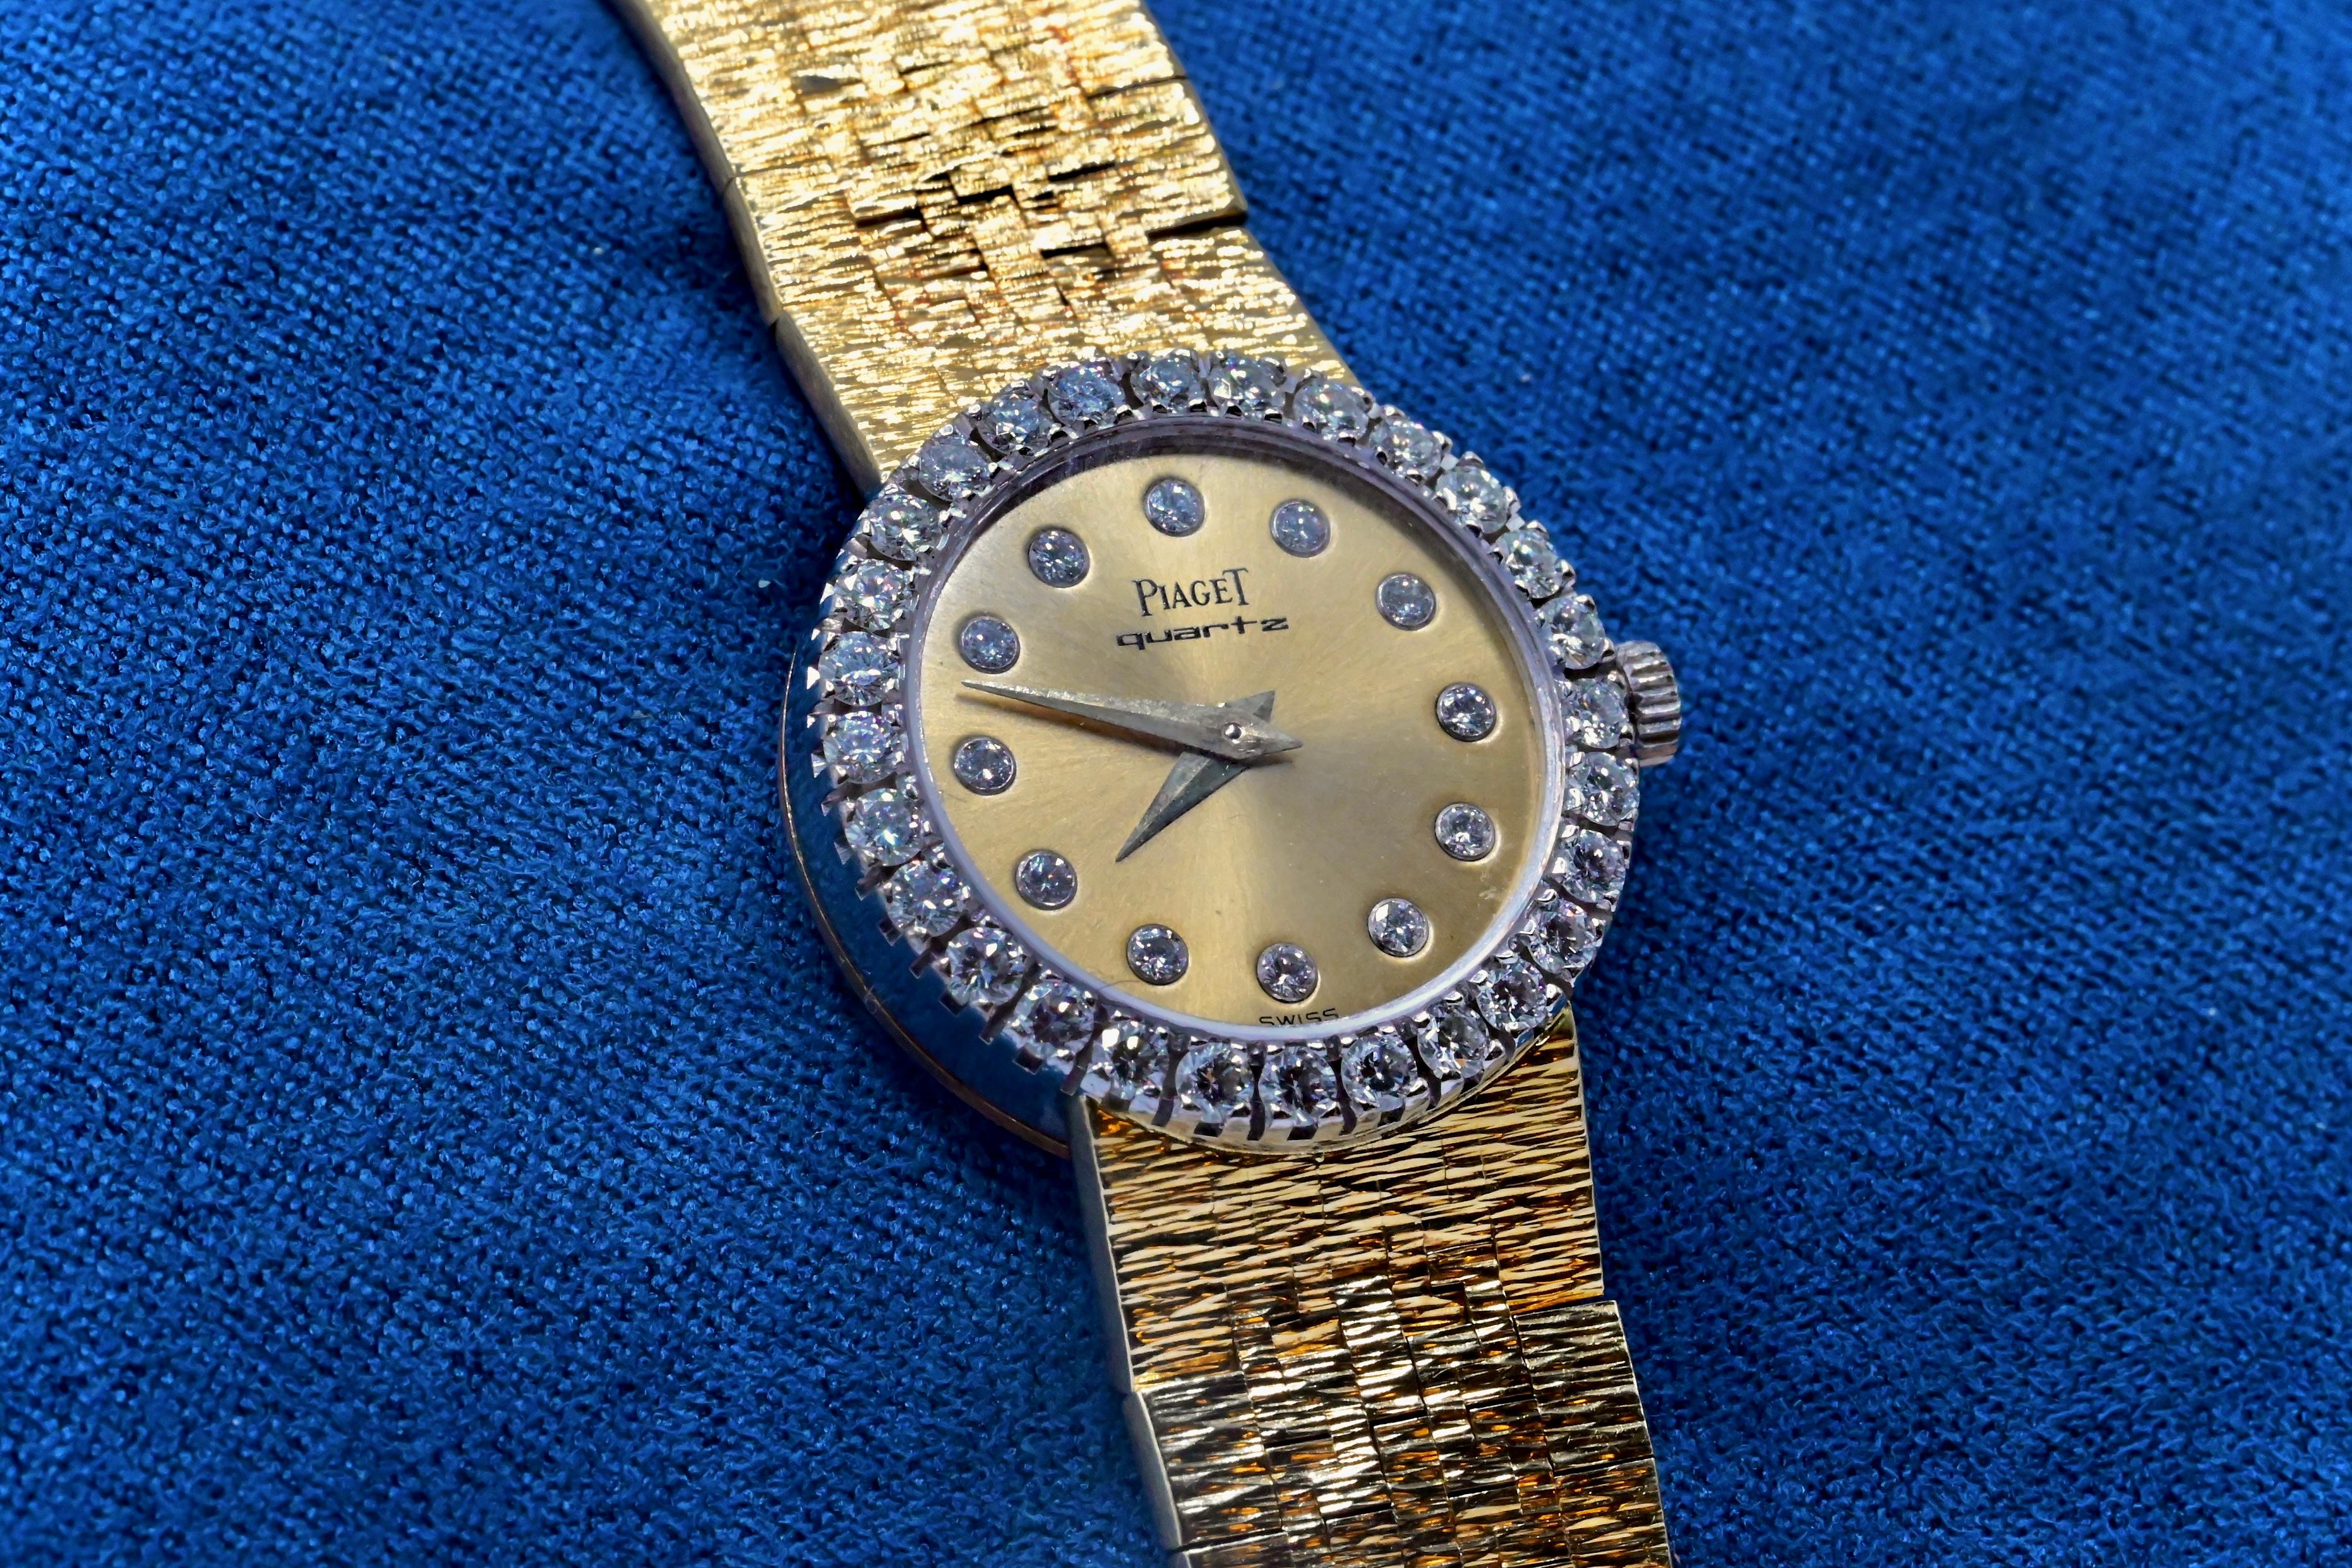 This is a stunning ladies Piaget wristwatch made with 18k yellow & white gold. The bezel of the watch is encrusted with 28 exceptional high quality round cut diamonds, and has 12 round cut diamonds placed as time markers. The strap length is 6 1/2